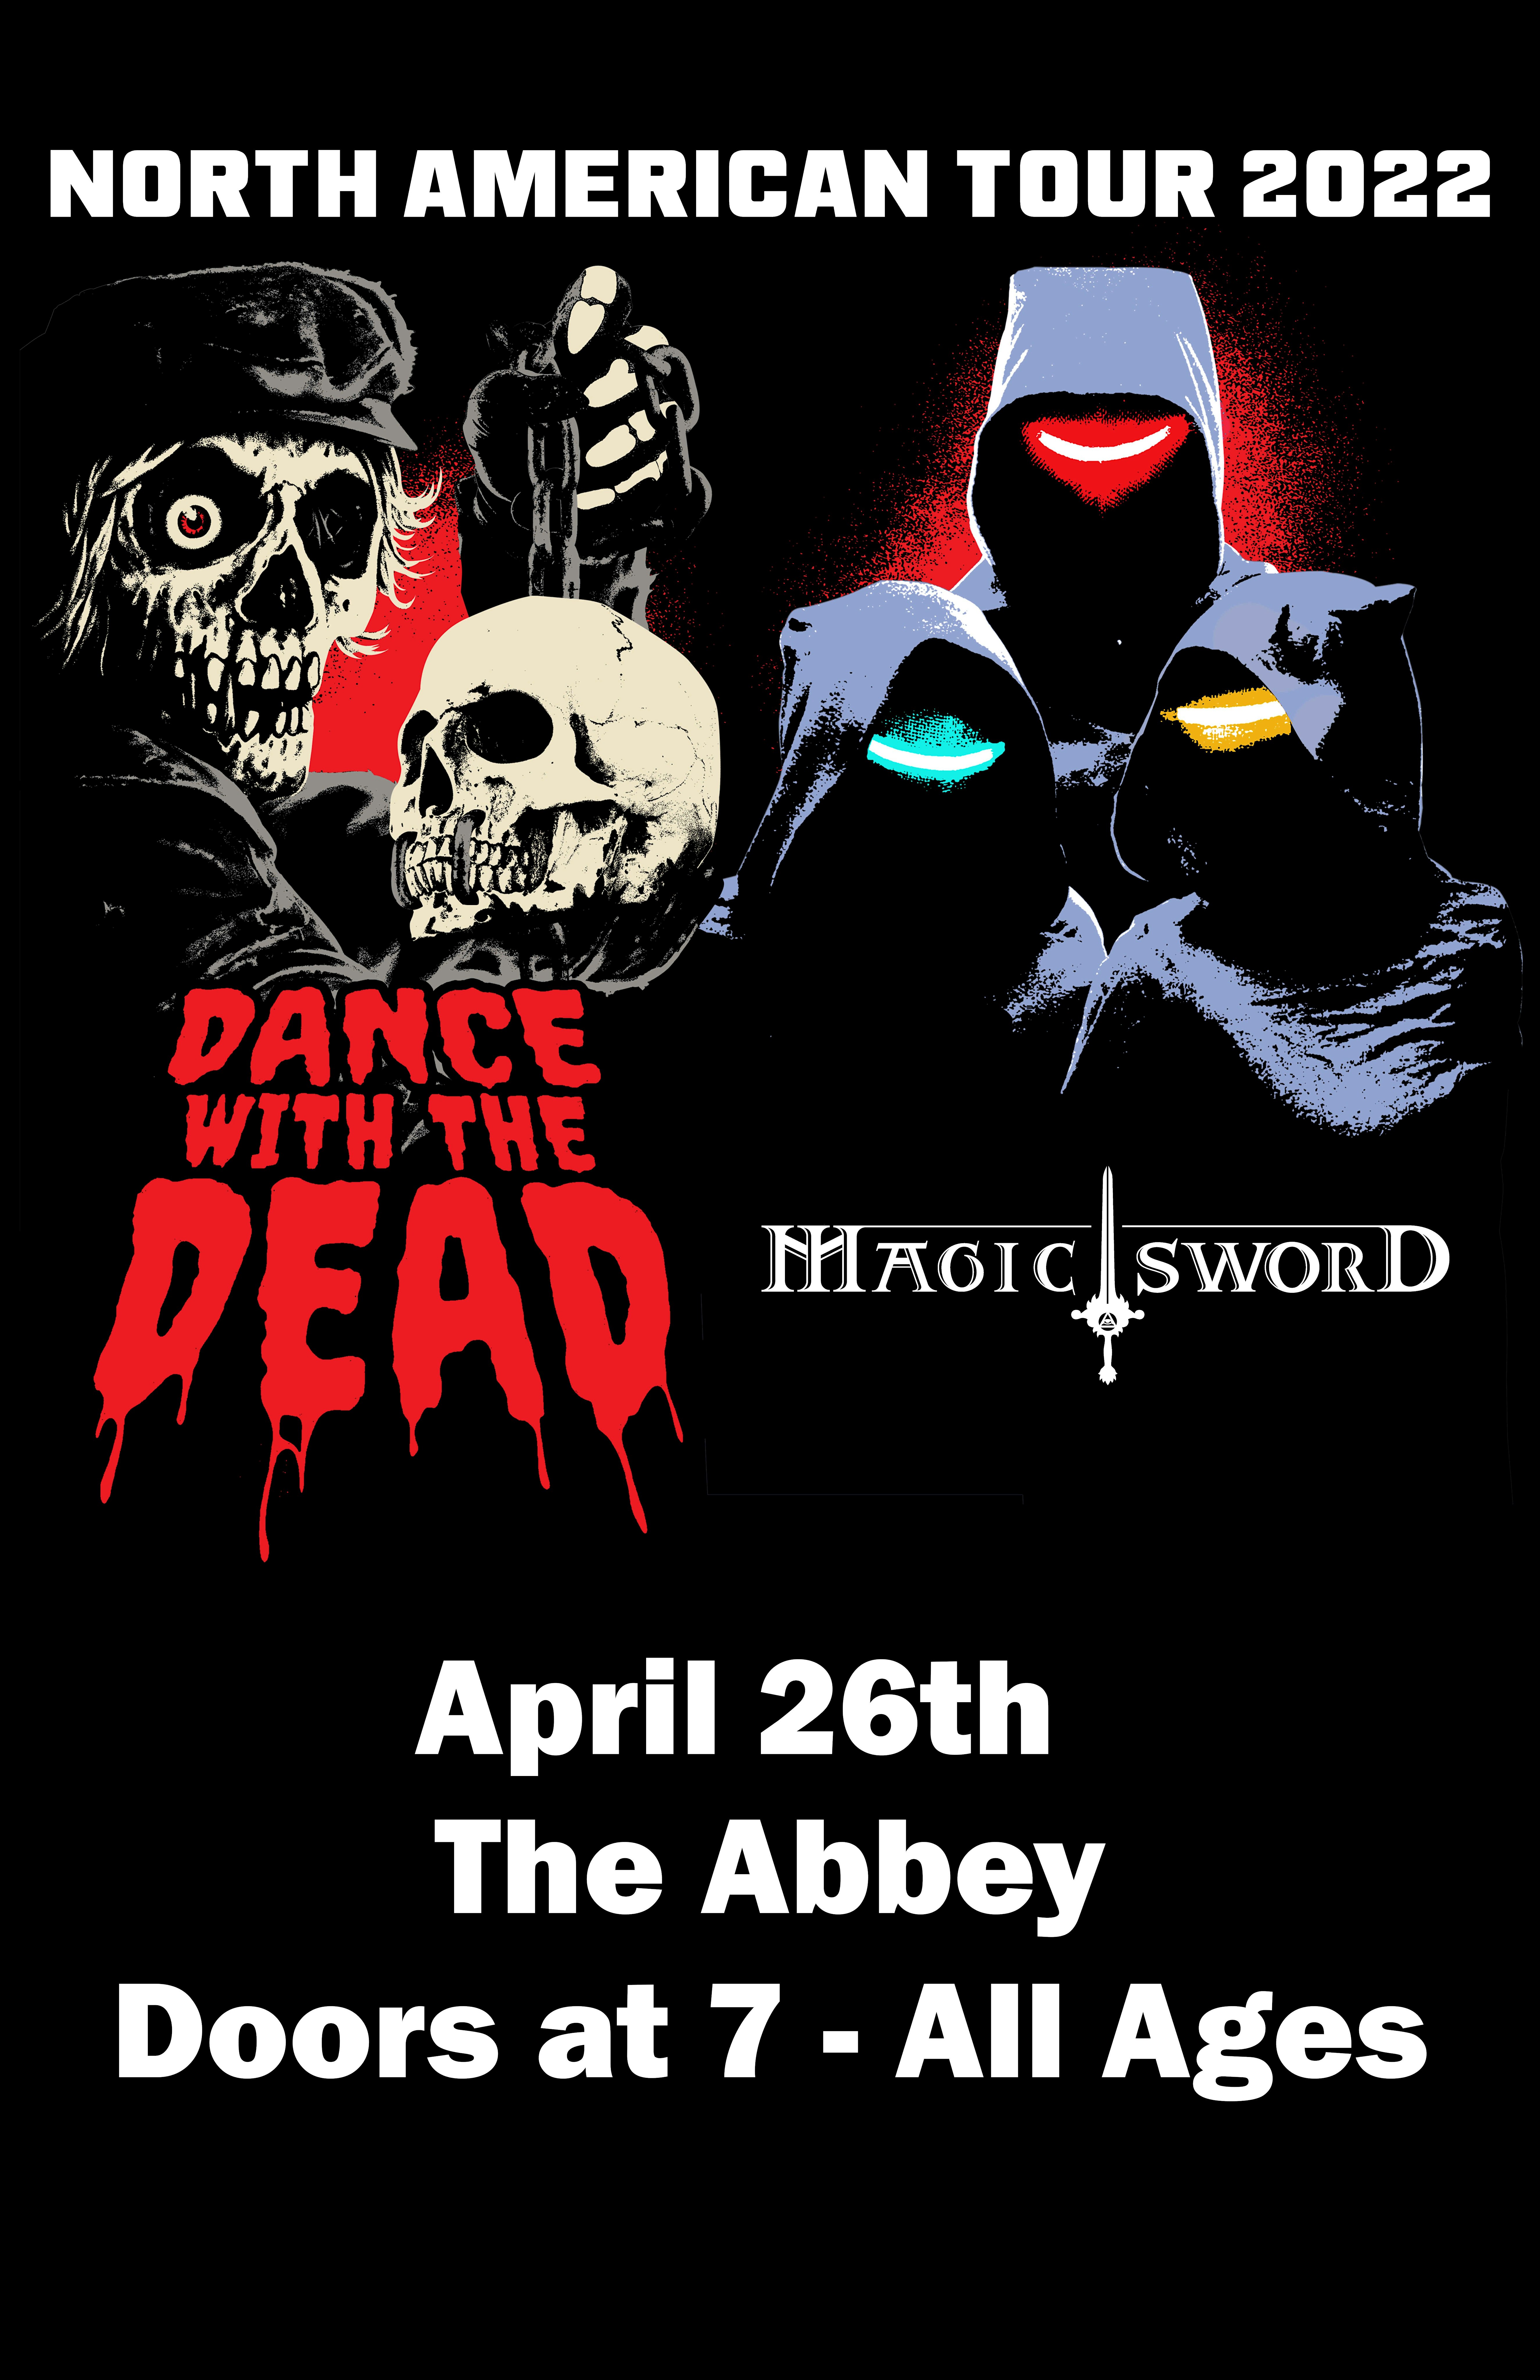 Magic Sword, Dance with the Dead, and More in Orlando at the Abbey